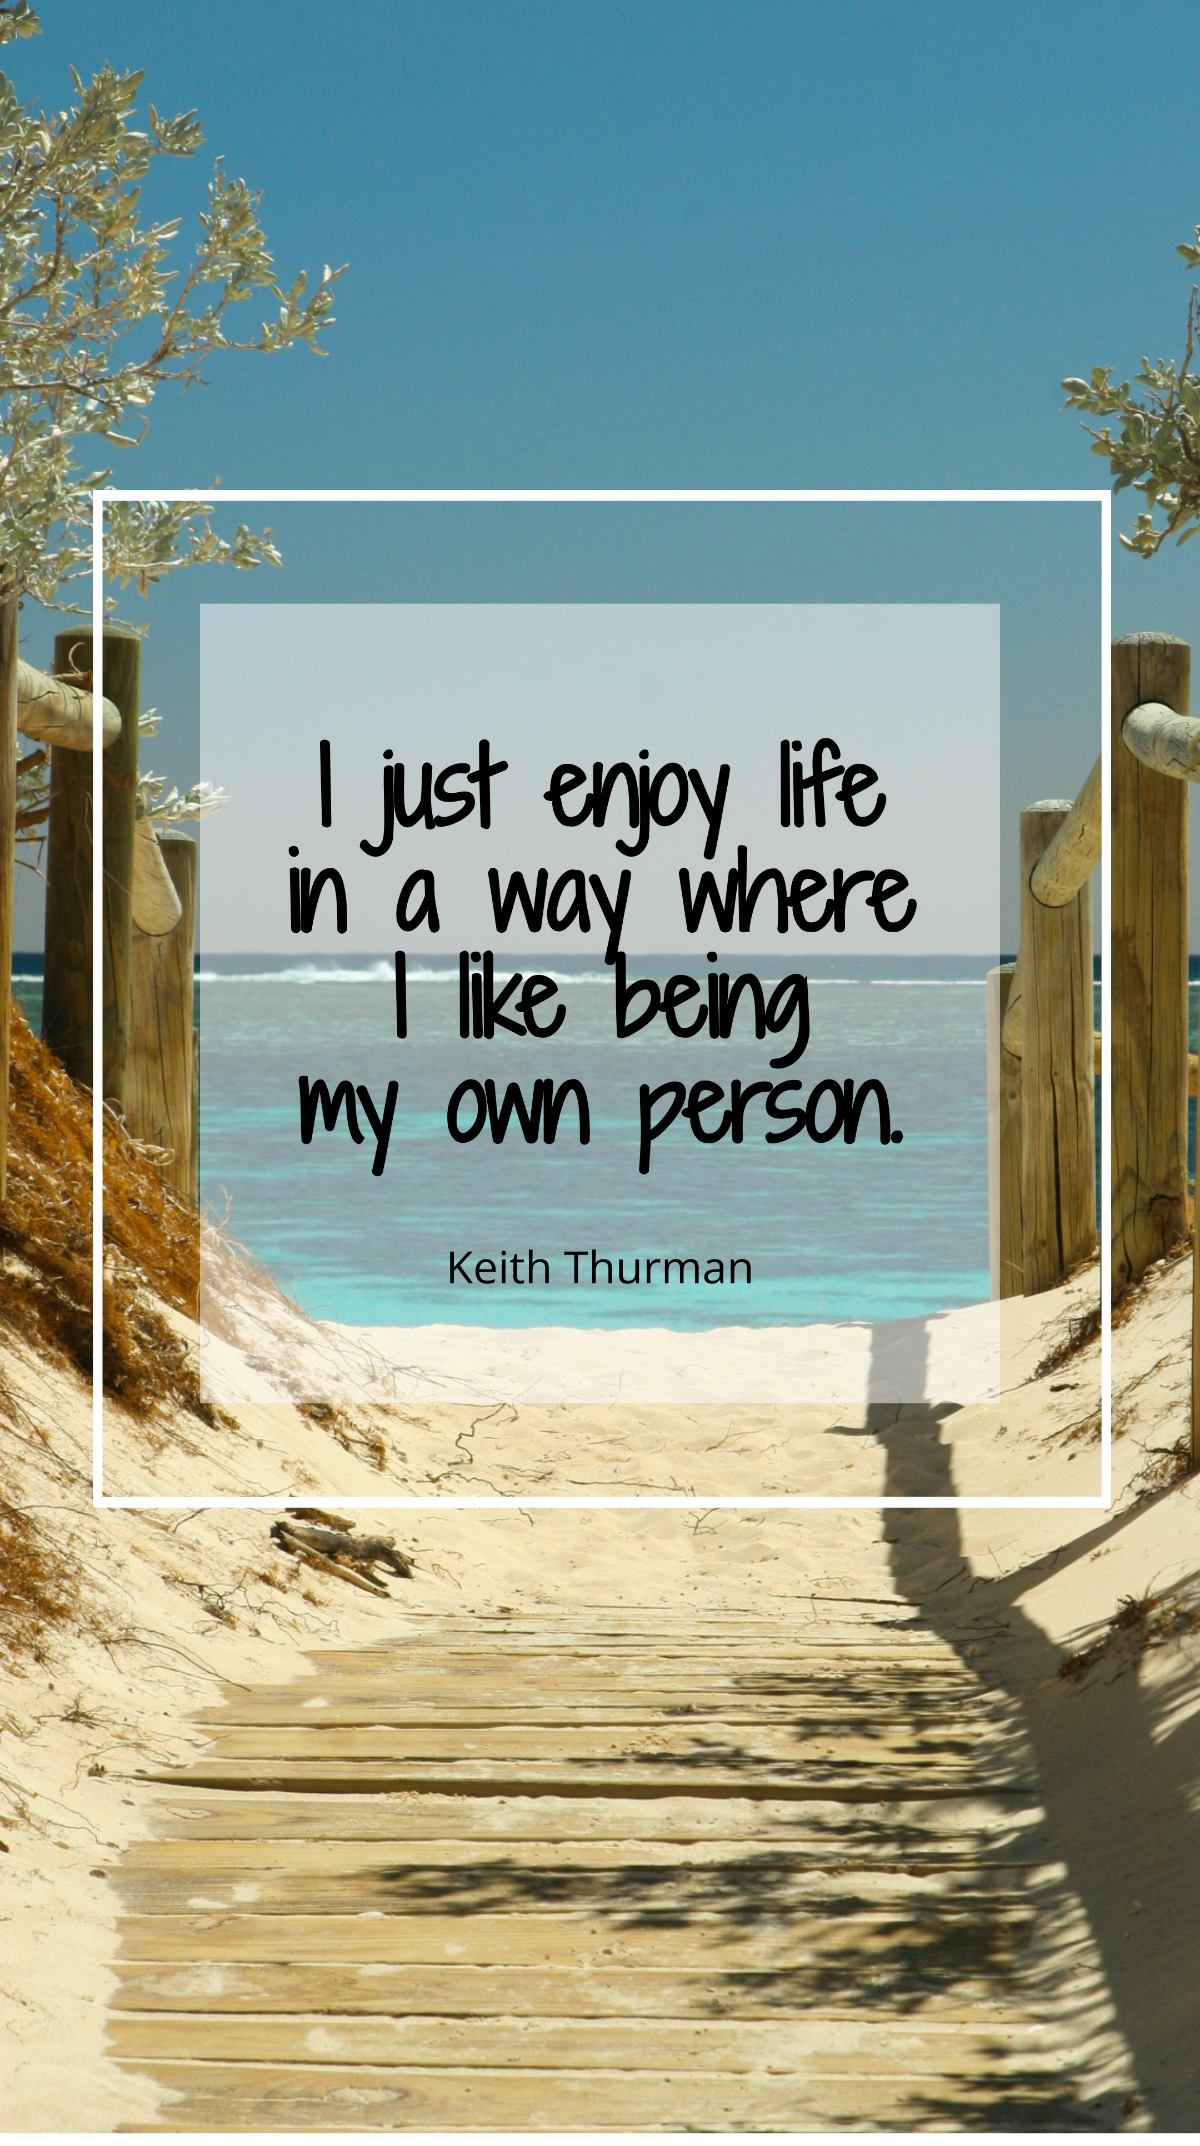 Keith Thurman - I just enjoy life in a way where I like being my own person. Template